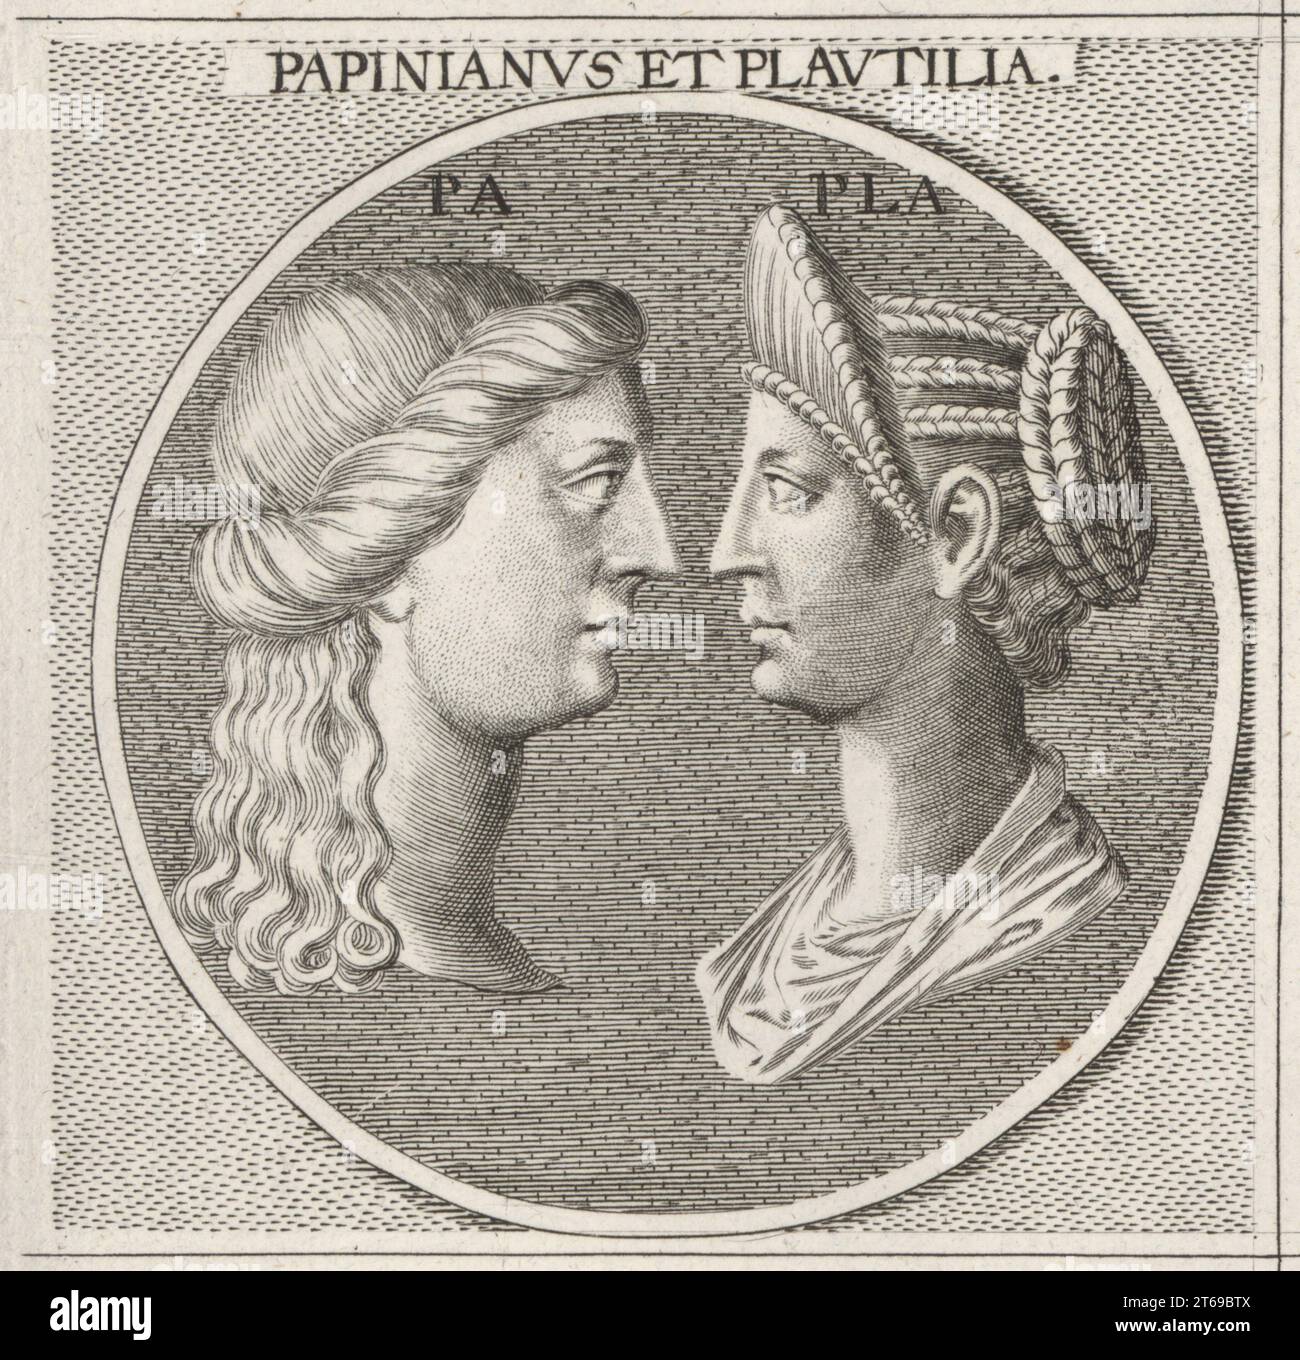 Roman jurist Papinian and Empress Publia Fulvia Plautilla (died 211), wife of Roman emperor Caracalla, exiled after the execution of her father Gaius Fulvius Plautianus. Papinianus et Plautilia. Copperplate engraving after an illustration by Joachim von Sandrart from his LAcademia Todesca, della Architectura, Scultura & Pittura, oder Teutsche Academie, der Edlen Bau- Bild- und Mahlerey-Kunste, German Academy of Architecture, Sculpture and Painting, Jacob von Sandrart, Nuremberg, 1675. Stock Photo